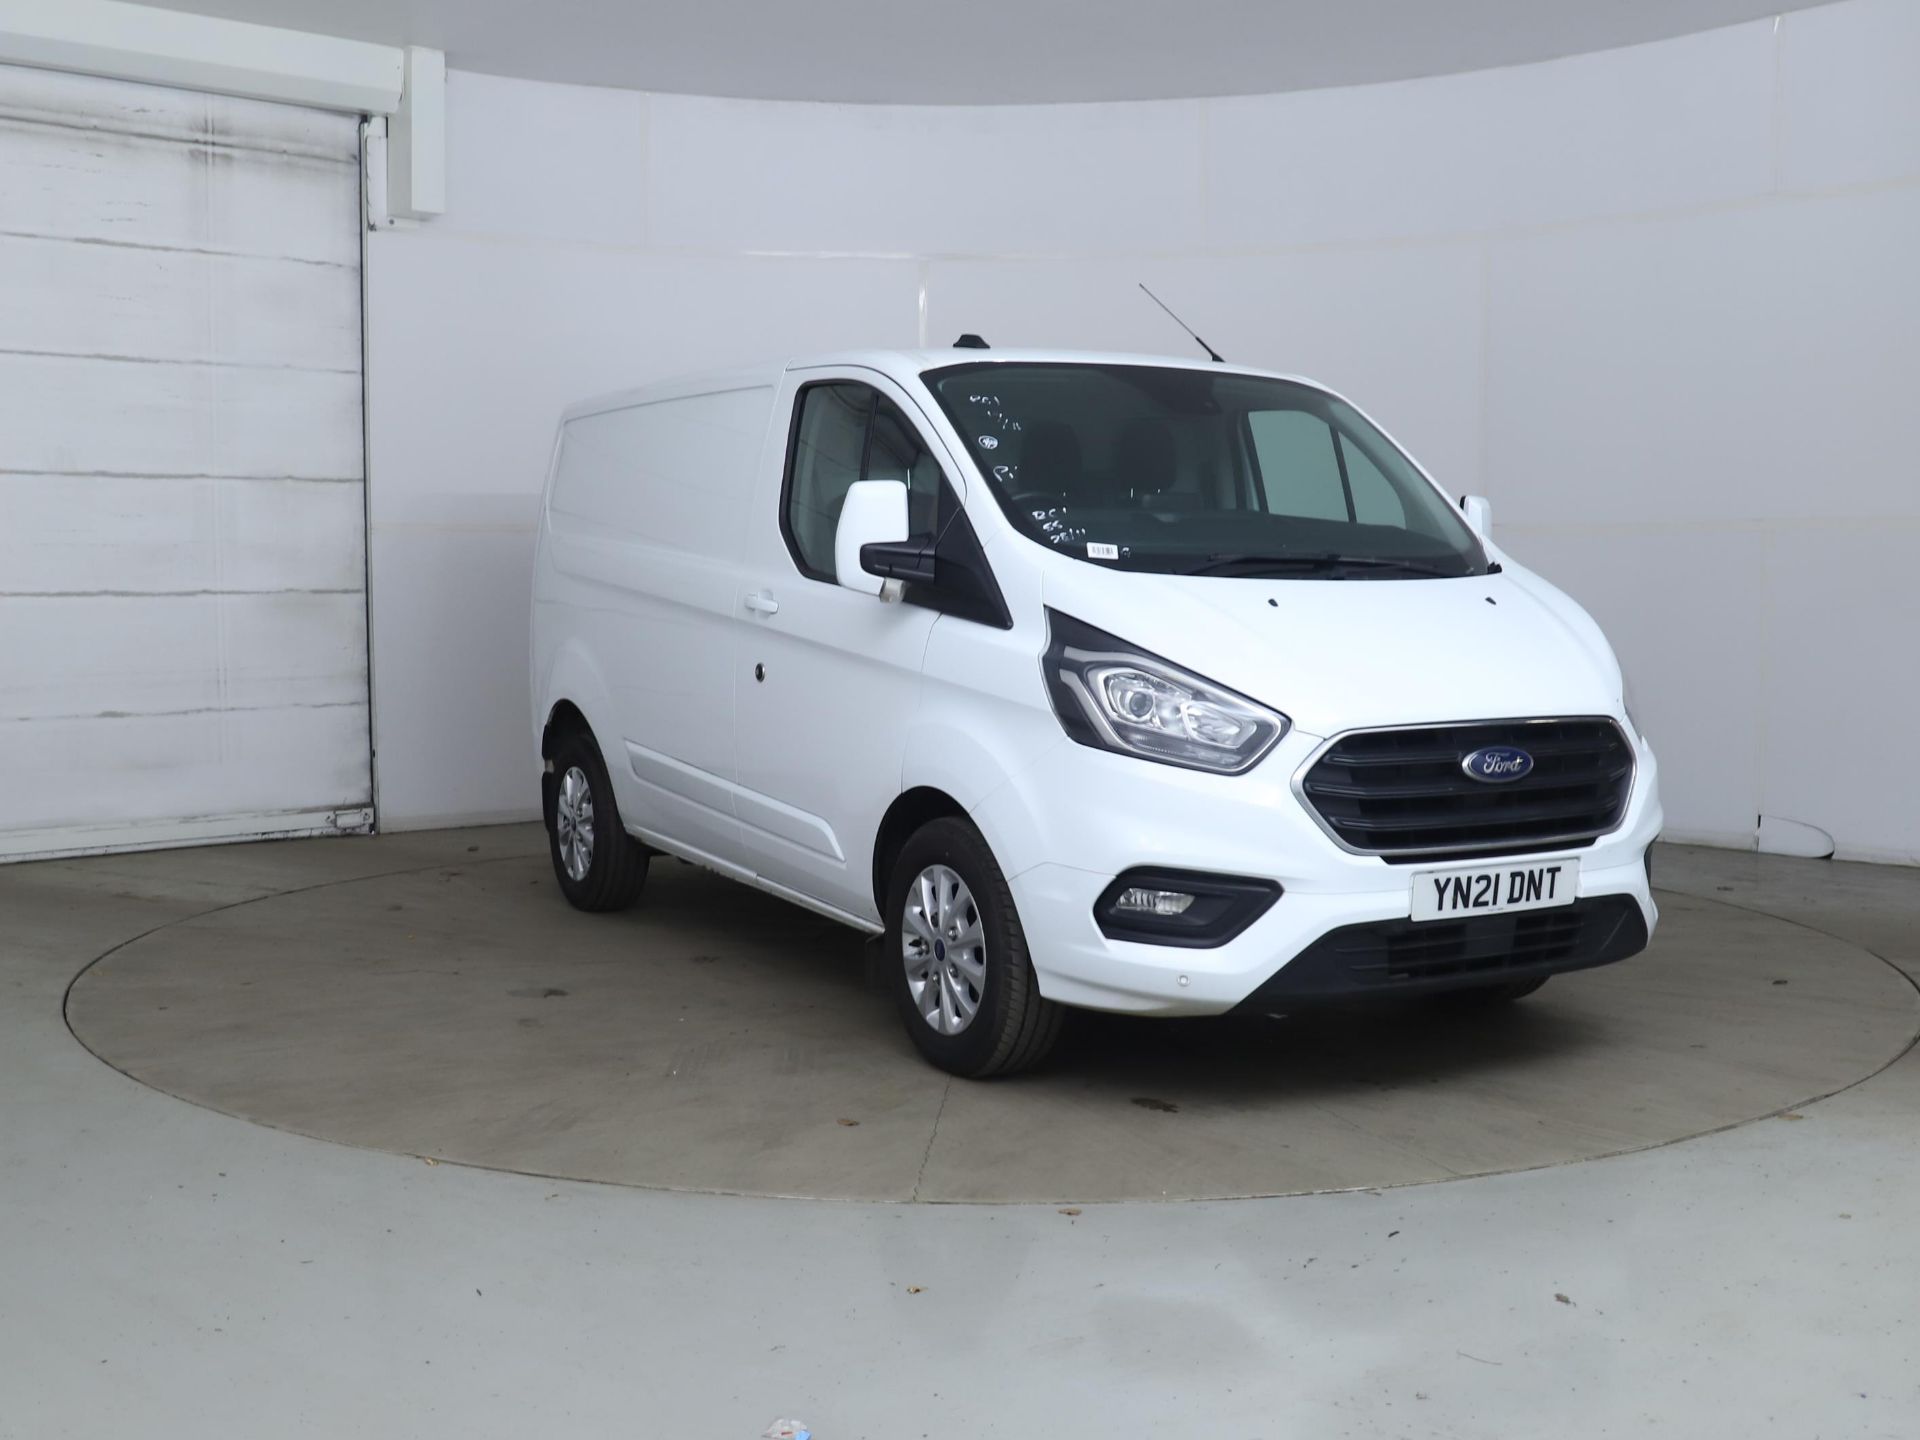 FORD TRANSIT "CUSTOM" LIMITED 2.0 TDCI (130) 21 REG - 1 OWNER - ONLY 46K MILES - AIR CON - ALLOYS